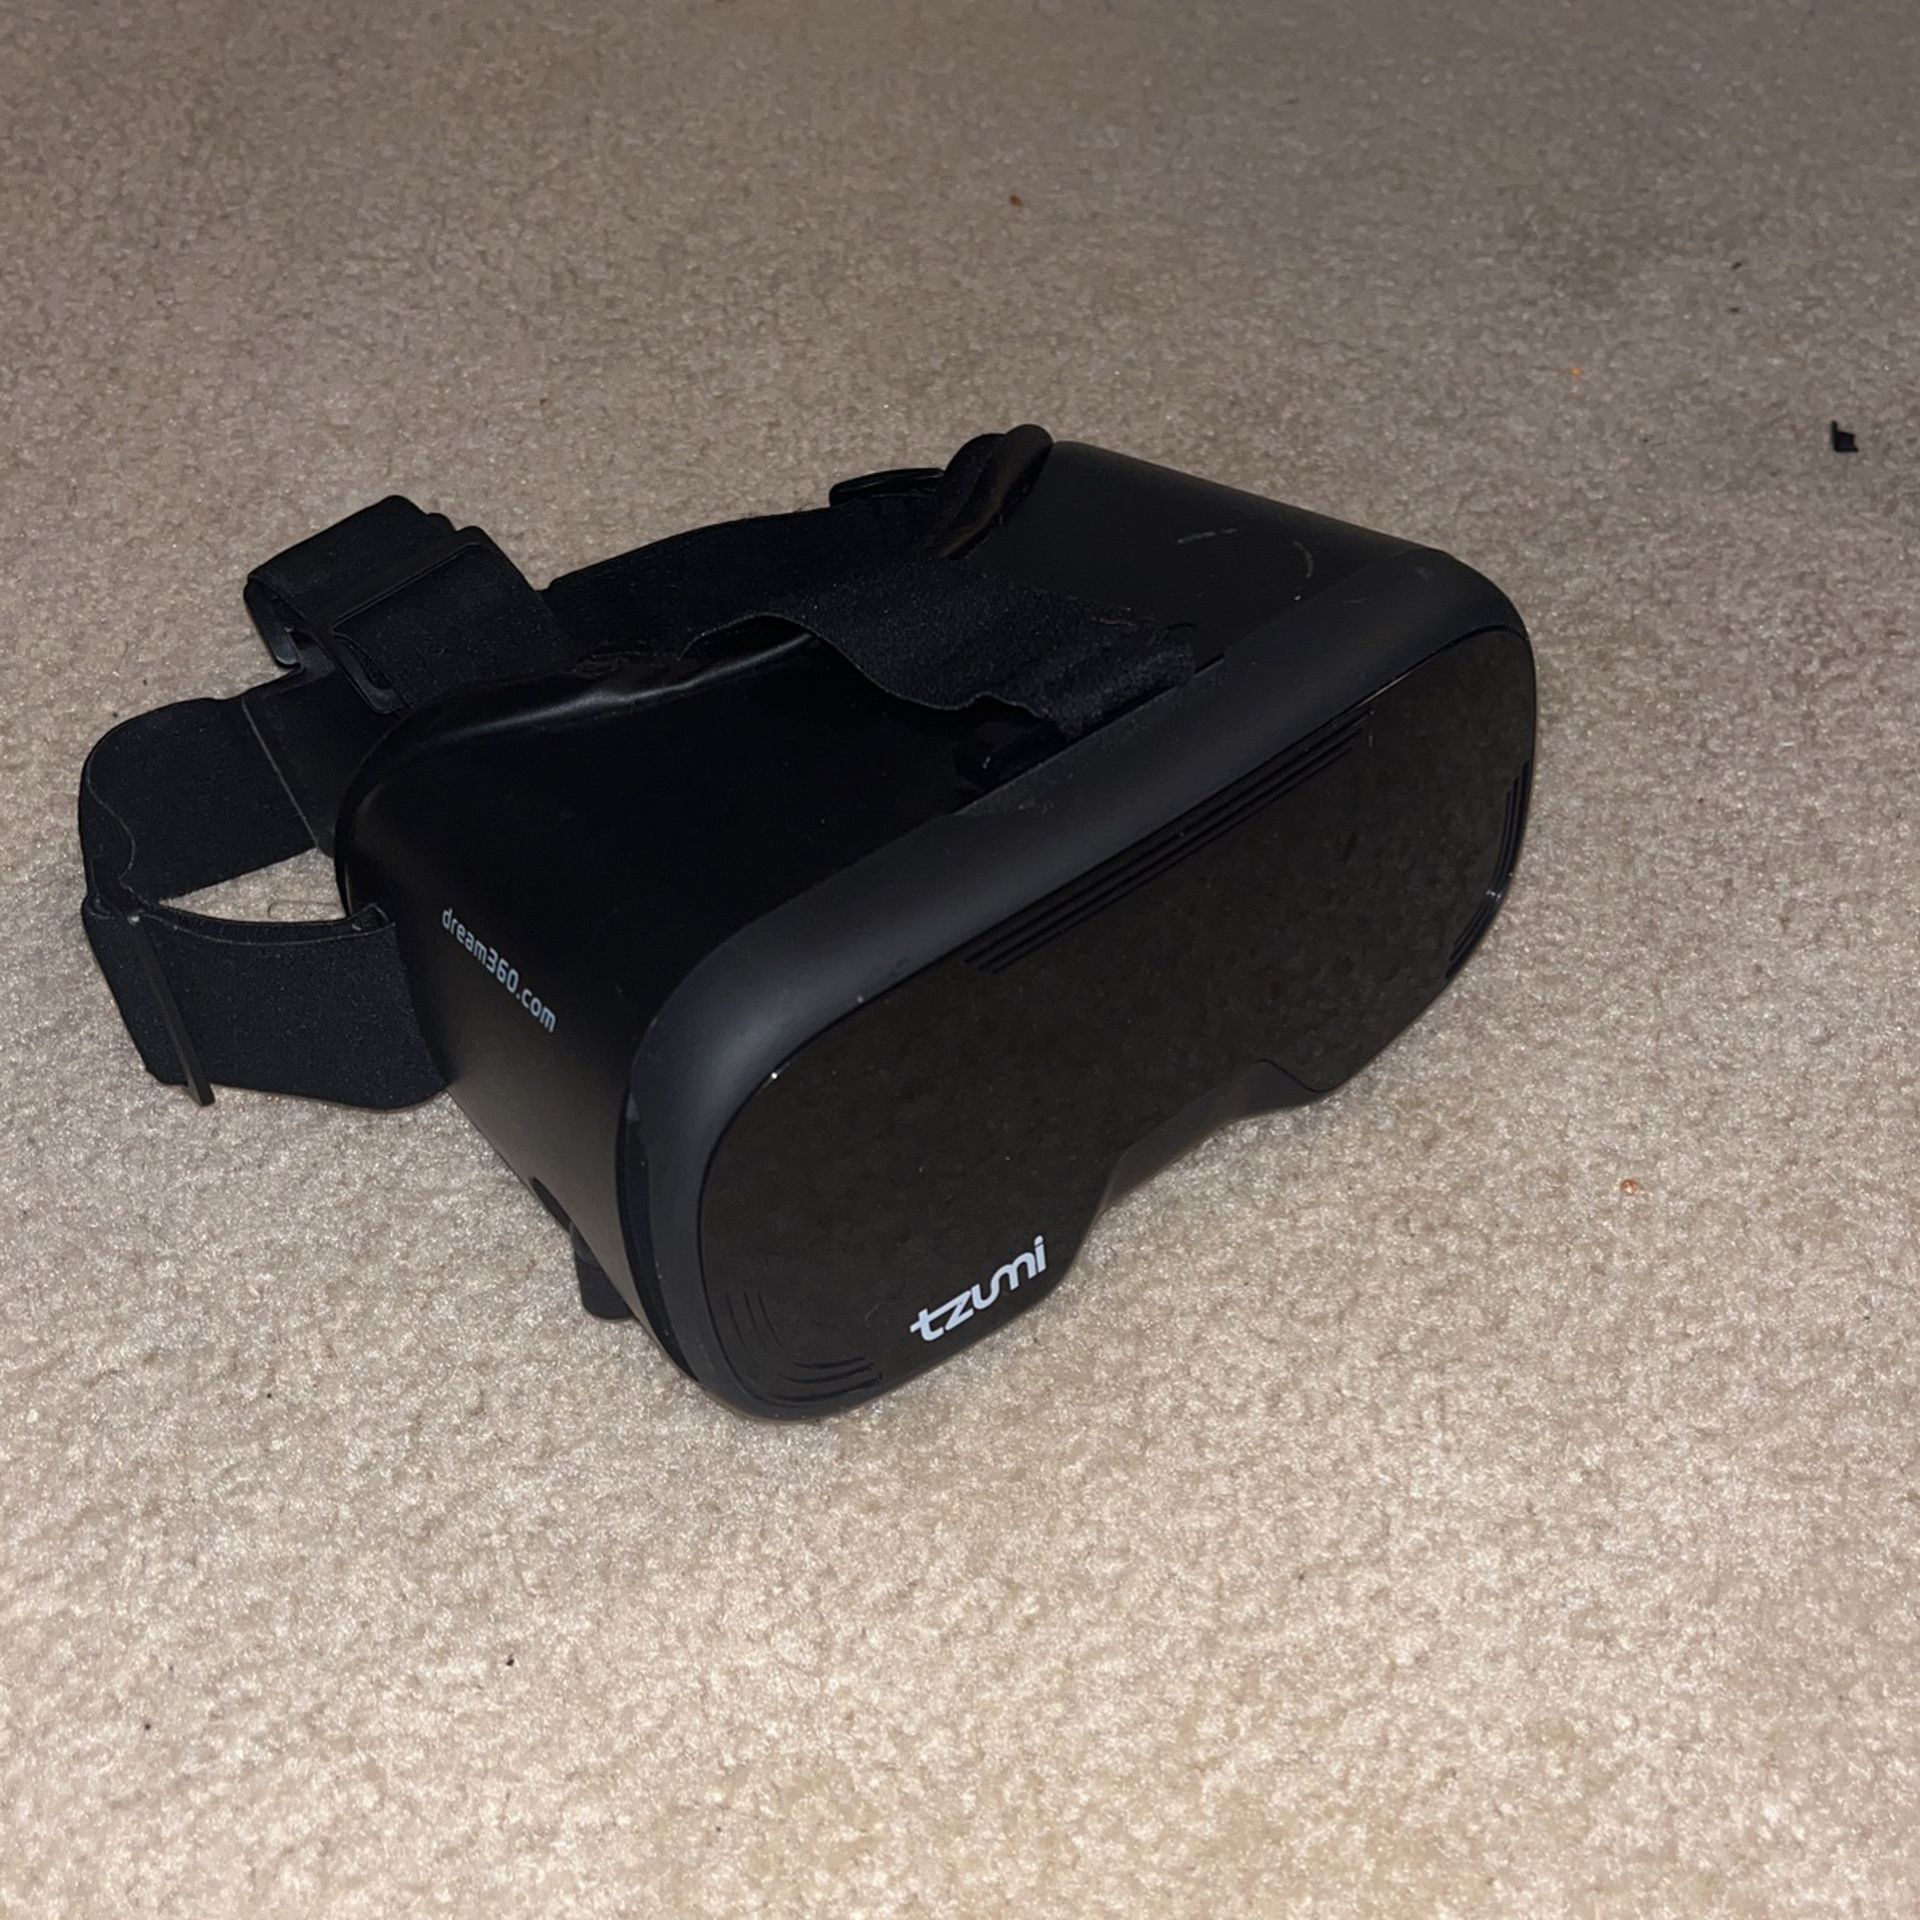 Tzumi Phone Vr Headset With Earbuds